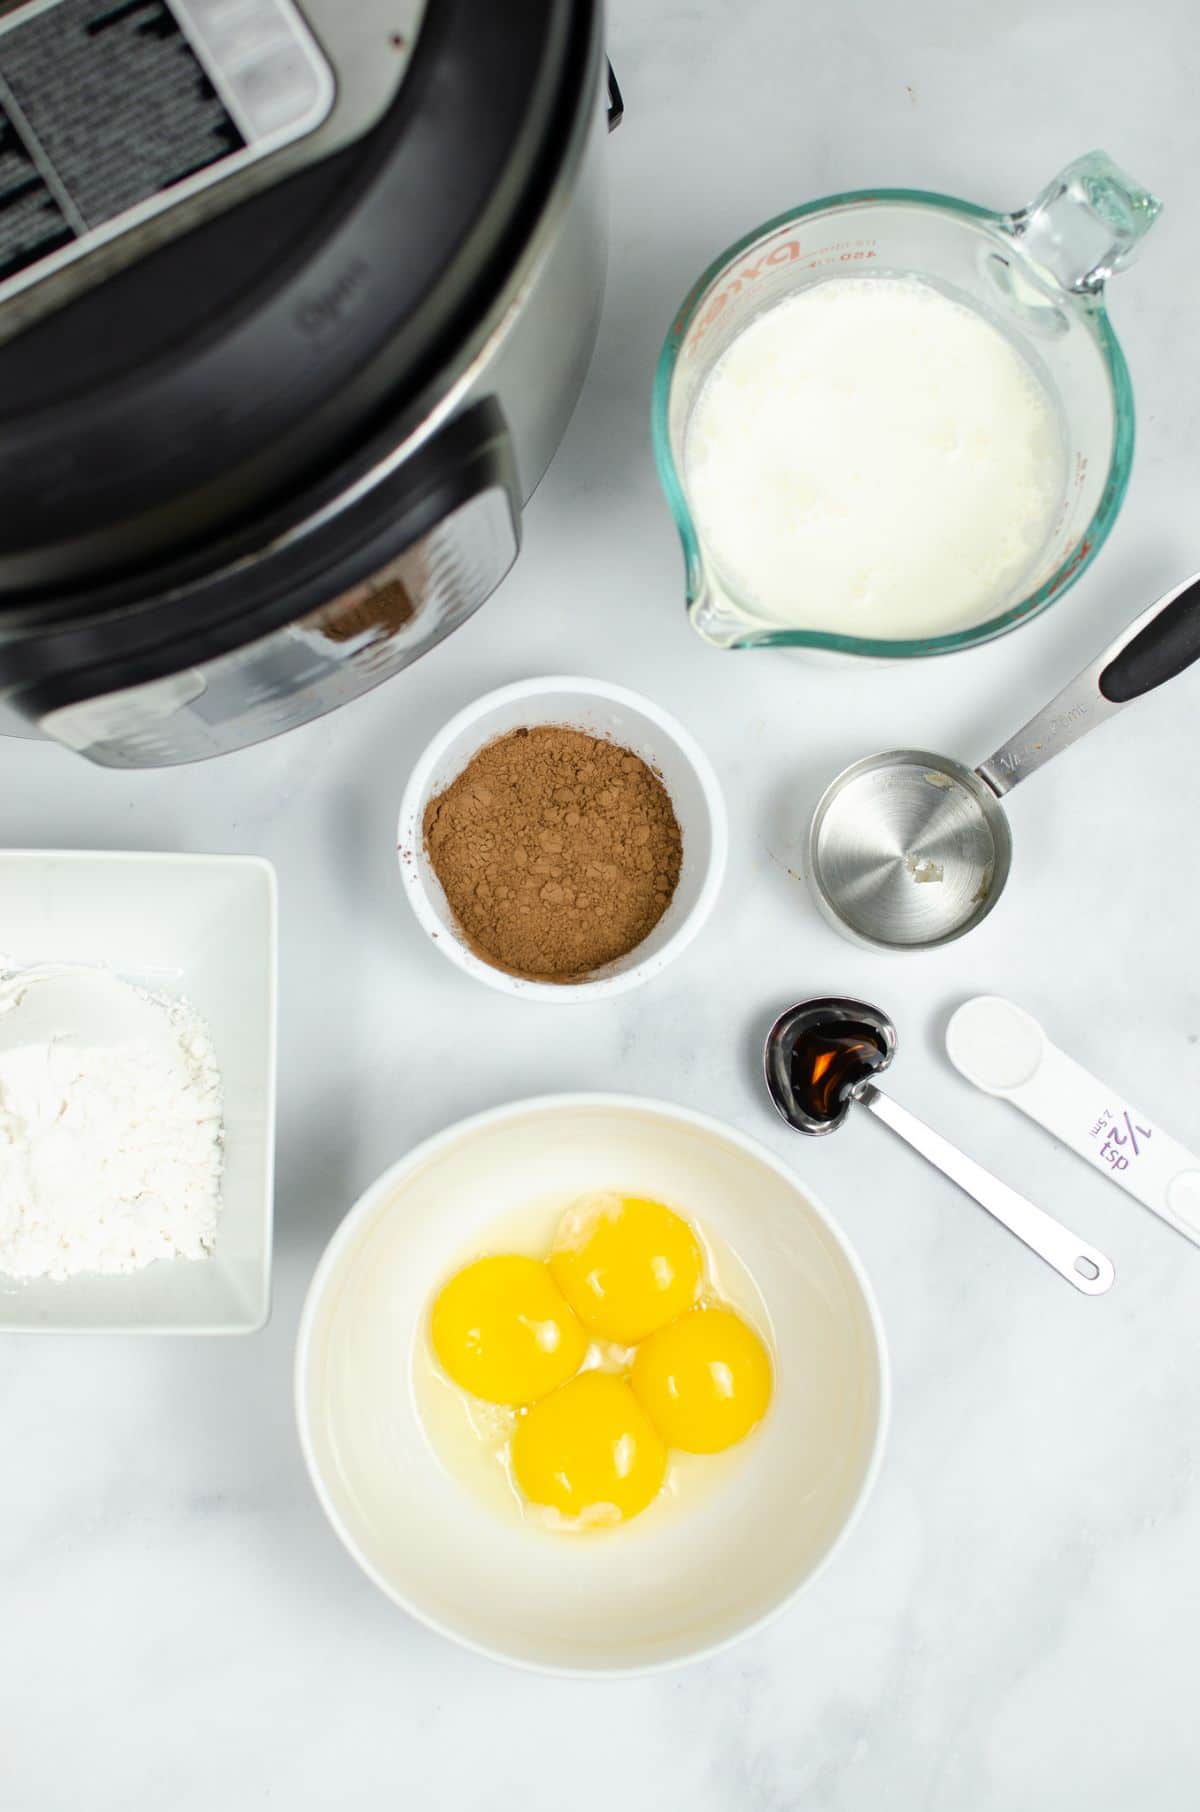 Ingredients used to make Instant Pot Chocolate Mousse.